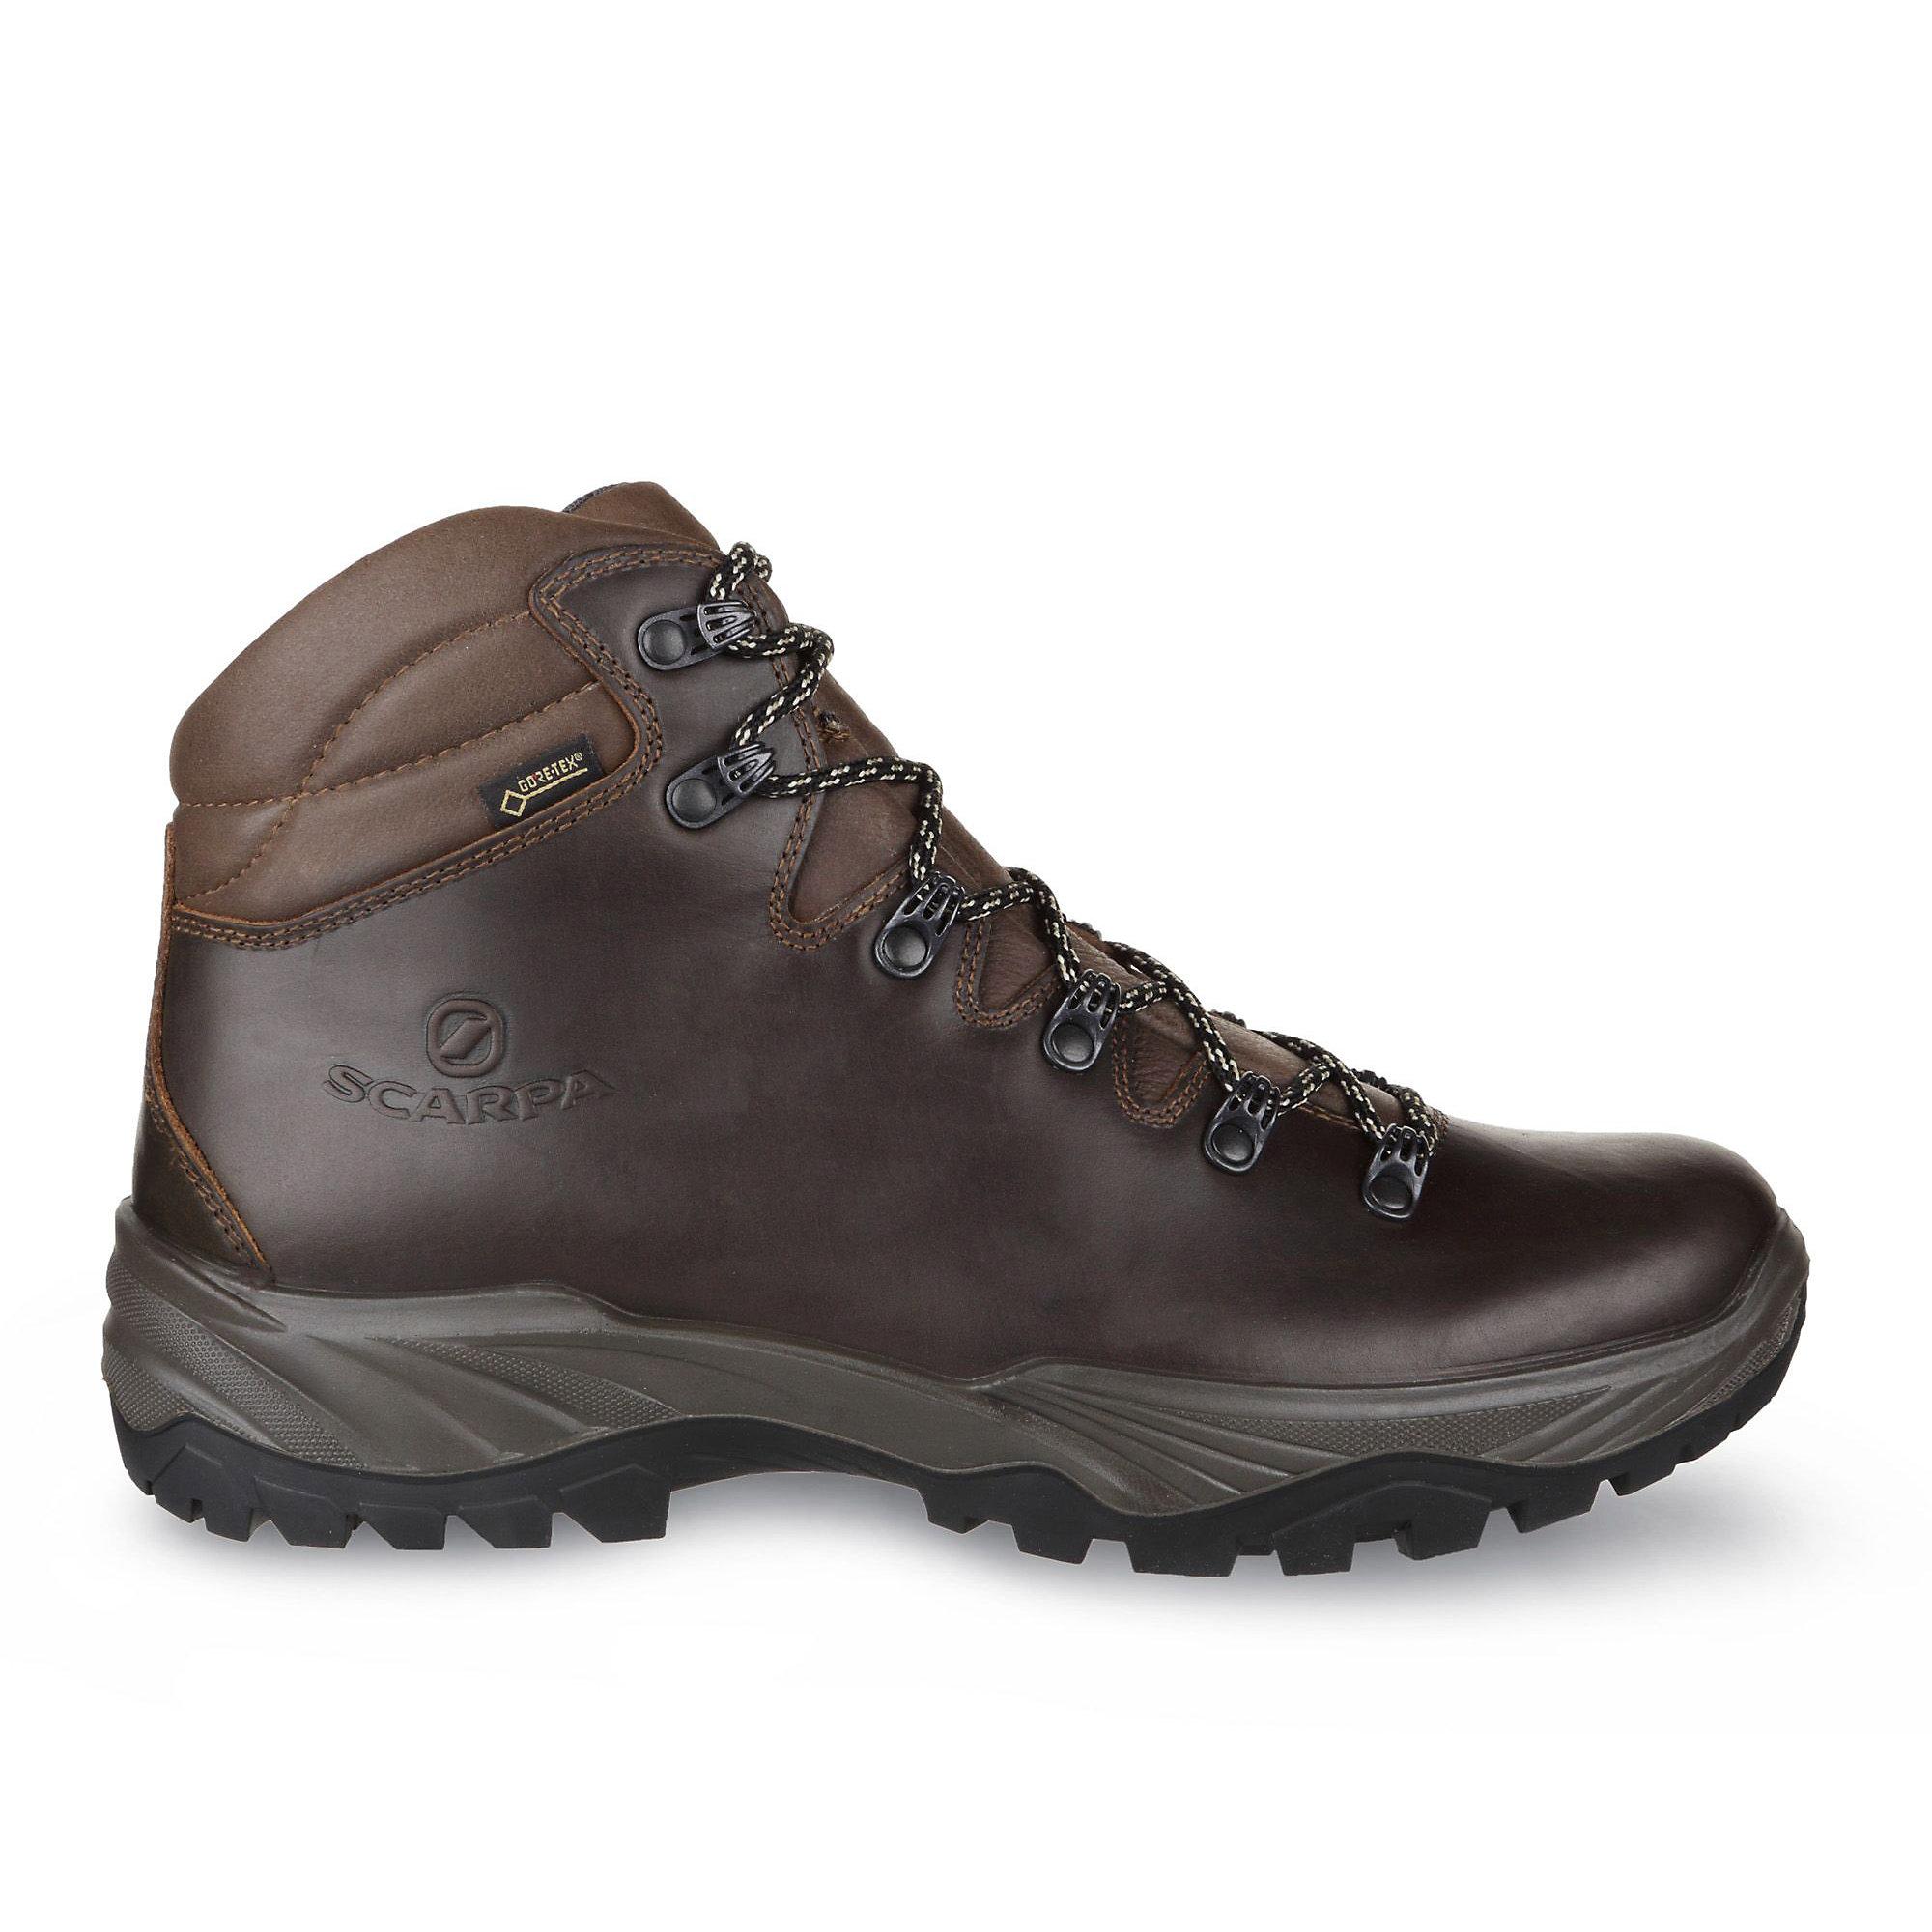 SCARPA Leather Terra Gtx Boot in Brown for Men - Save 25% - Lyst